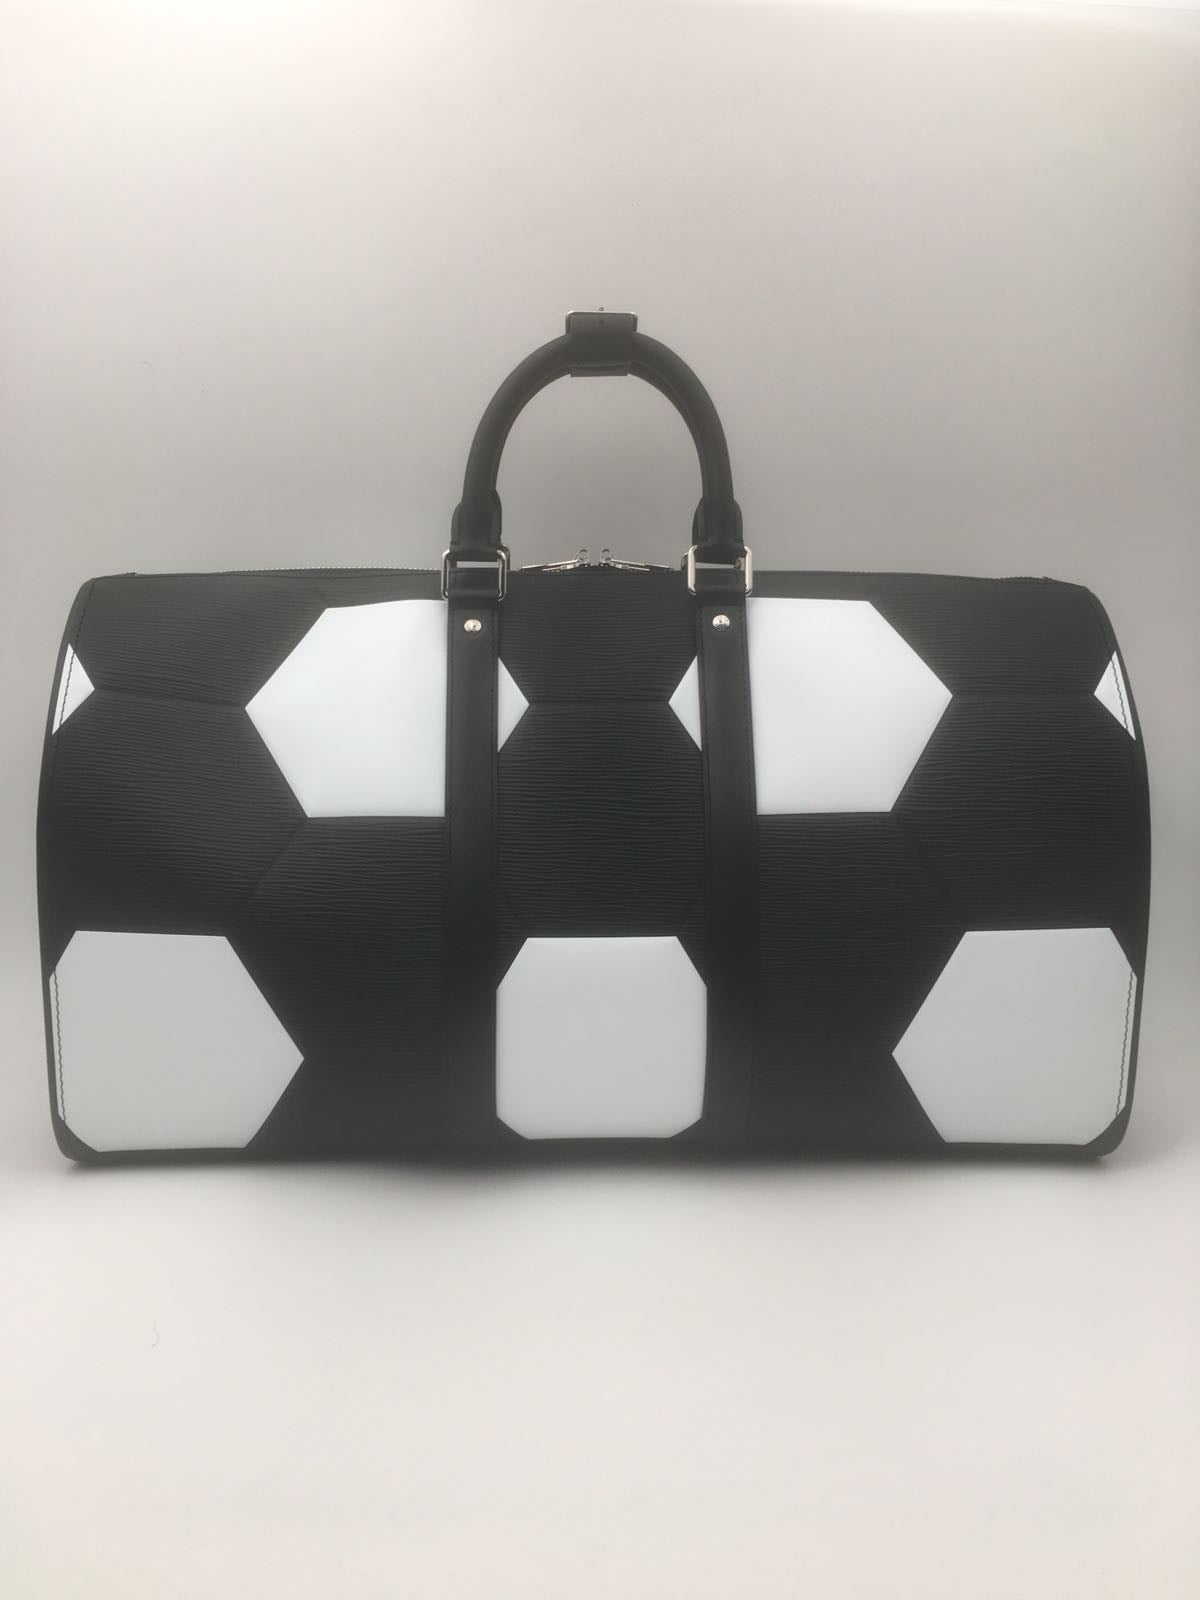 Louis Vuitton Bandouliere 50 Distorted Damier N50028 by The-Collectory